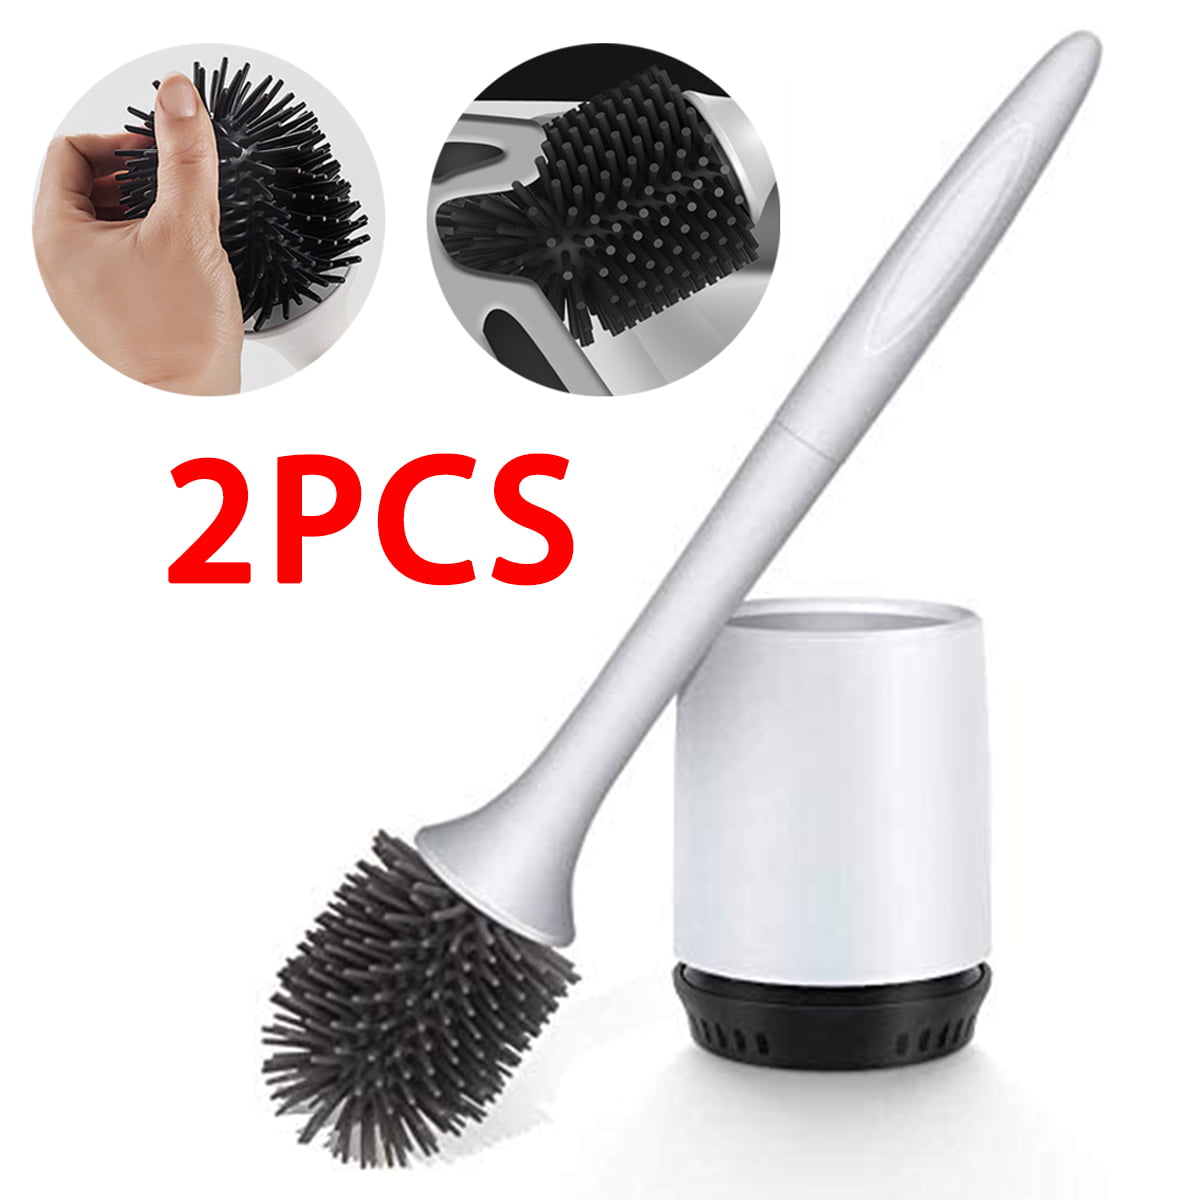 Loowy Toilet Brush Silicone Soft Bristle Base WC Bathroom Cleaning Tool Set 